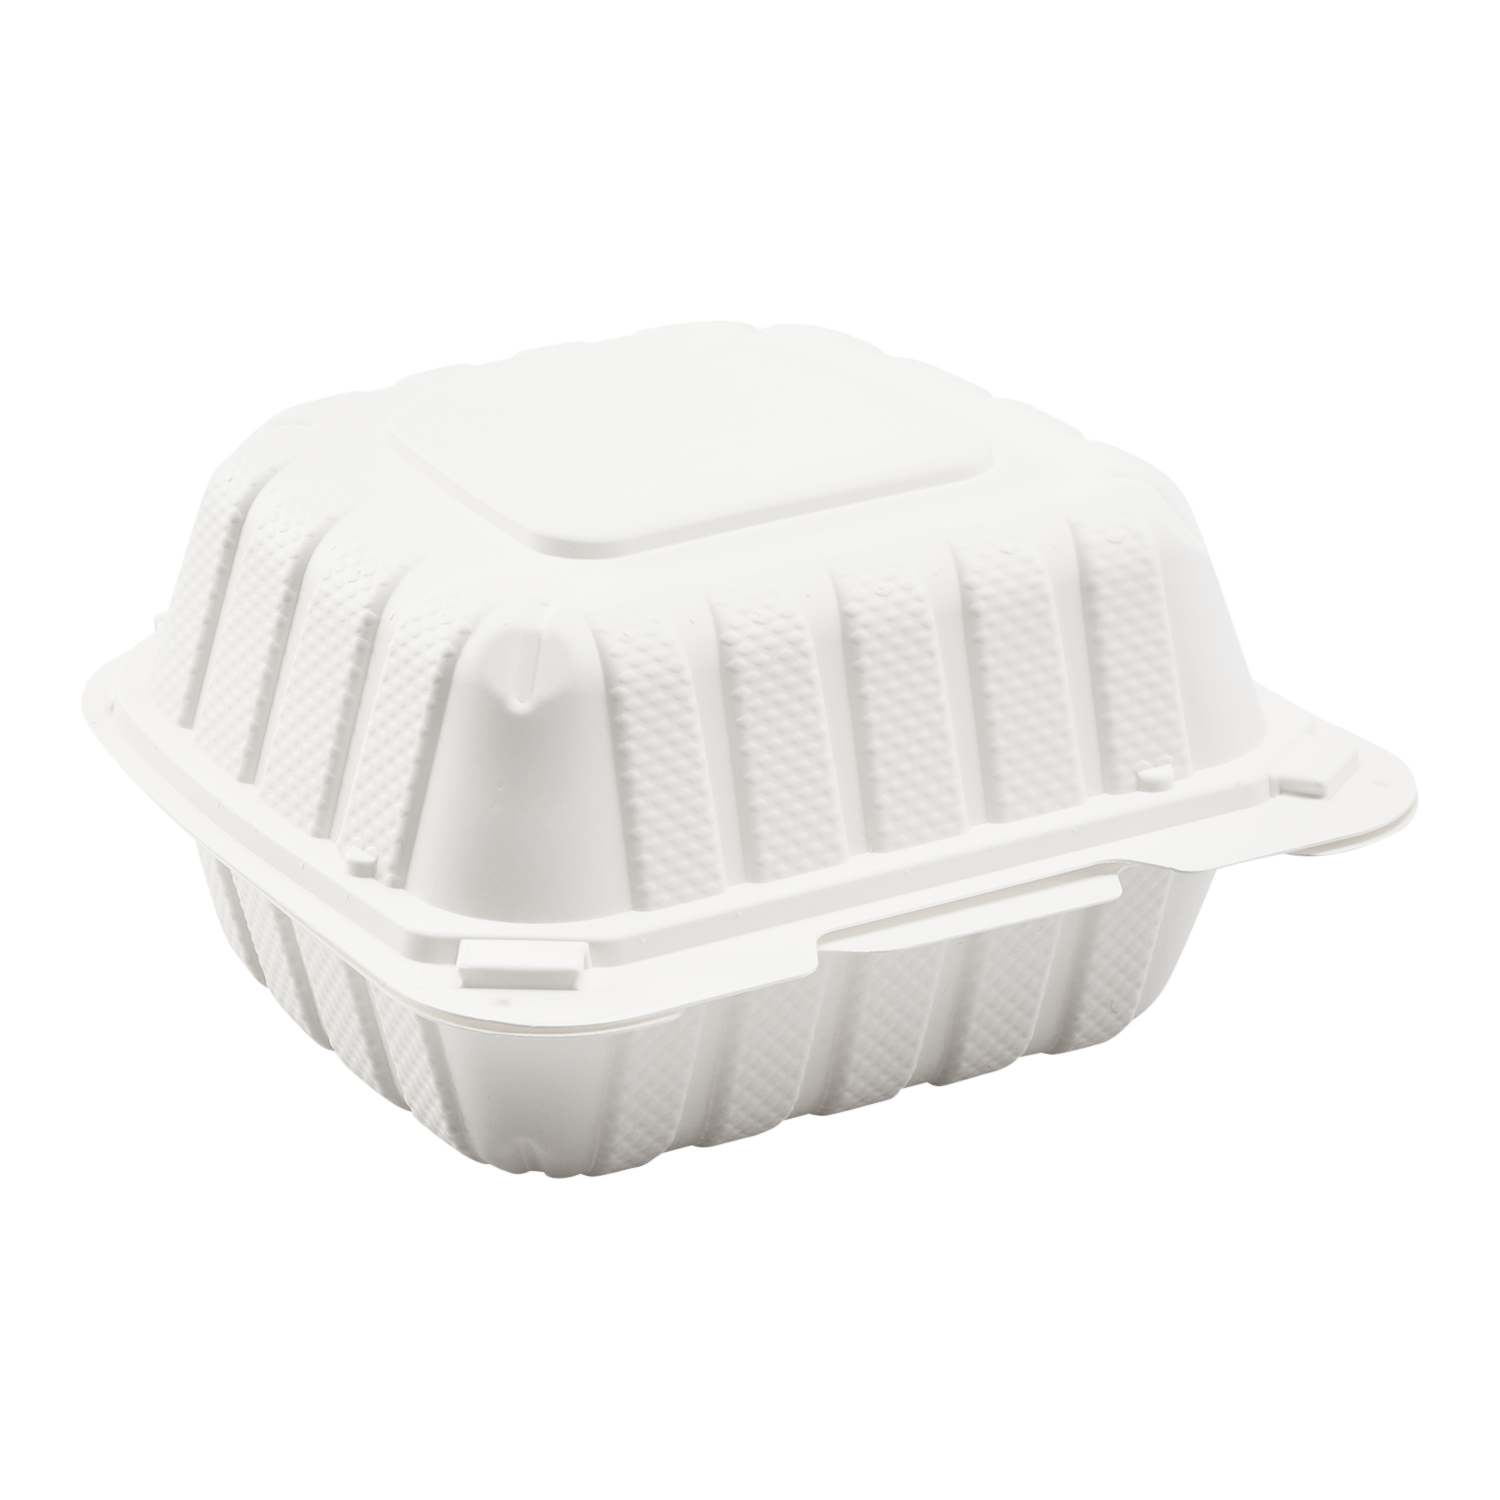 Stock Your Home 16 oz White Take Out Food Containers (50 Pack)